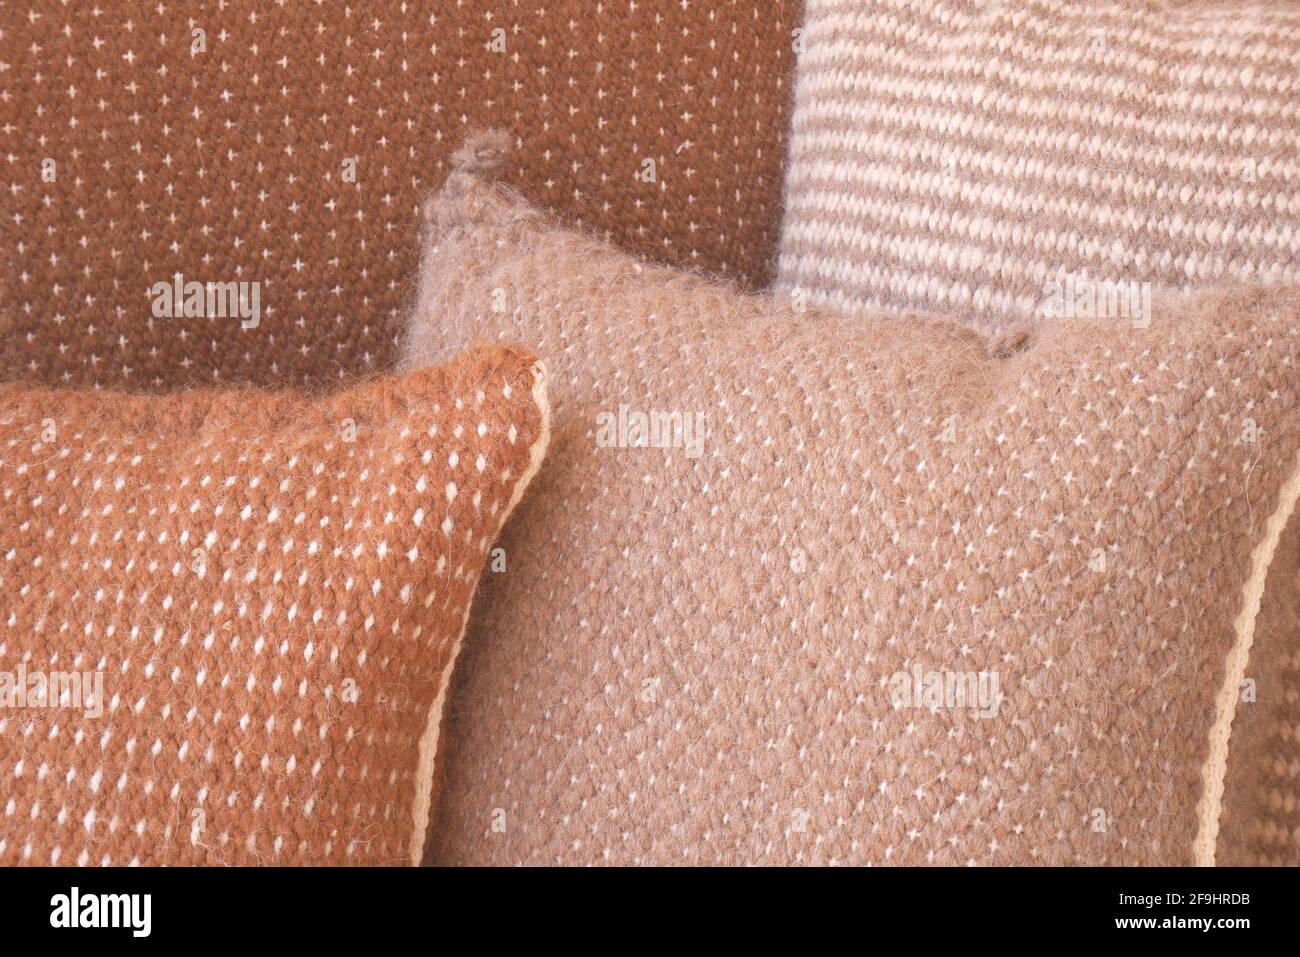 Rug and cushions made out of llama wool Stock Photo